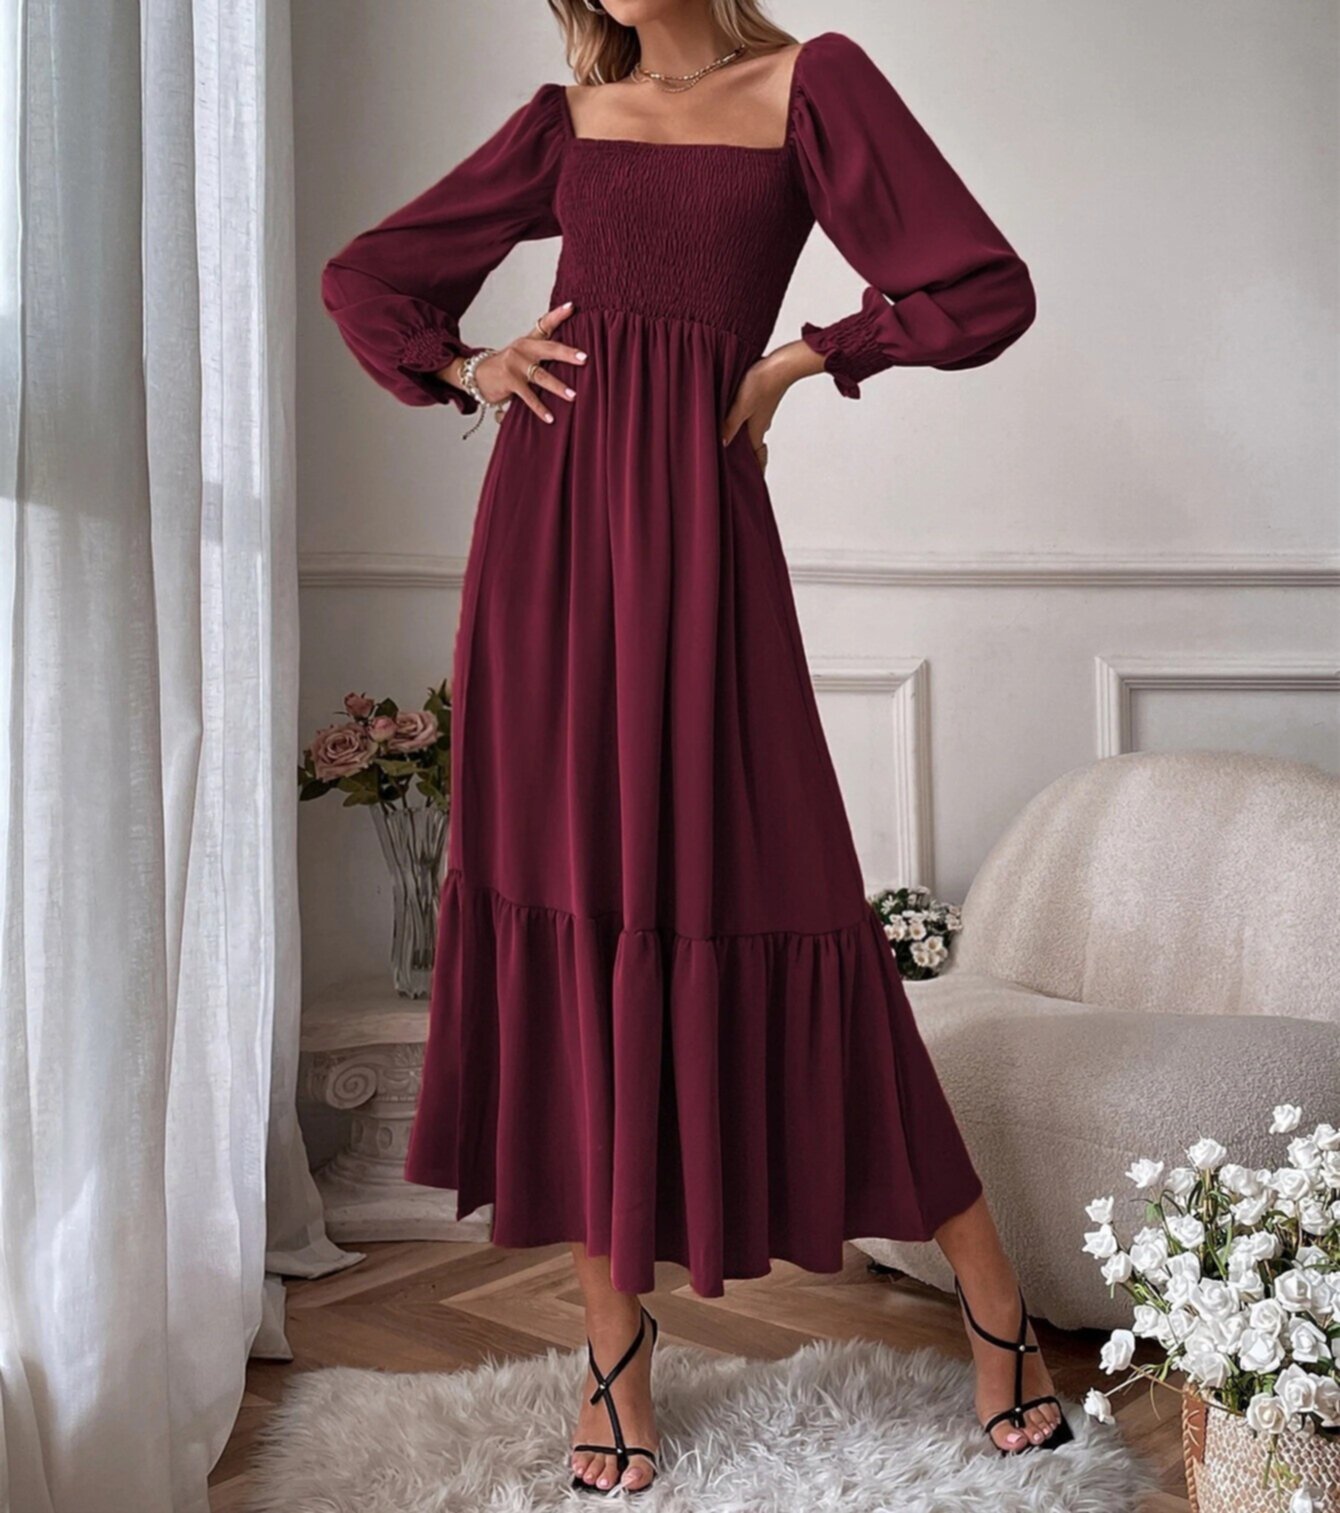 Square neck long sleeved thin soft dress